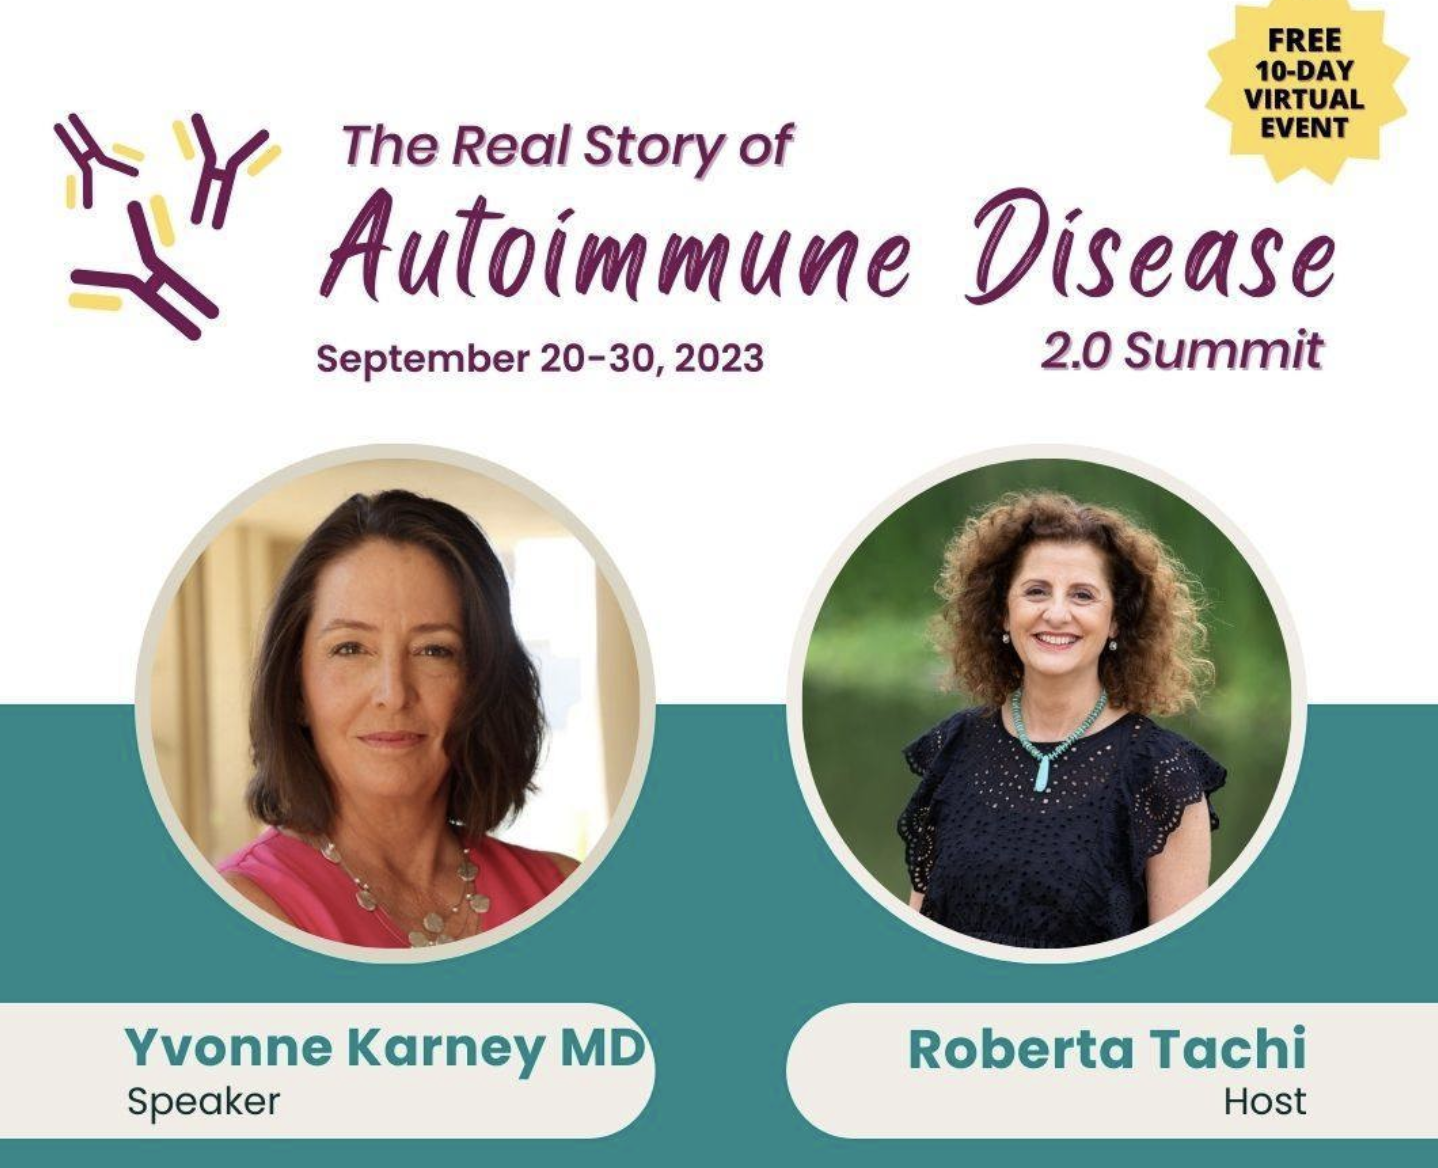 The Real Story of Autoimmune Disease 2.0